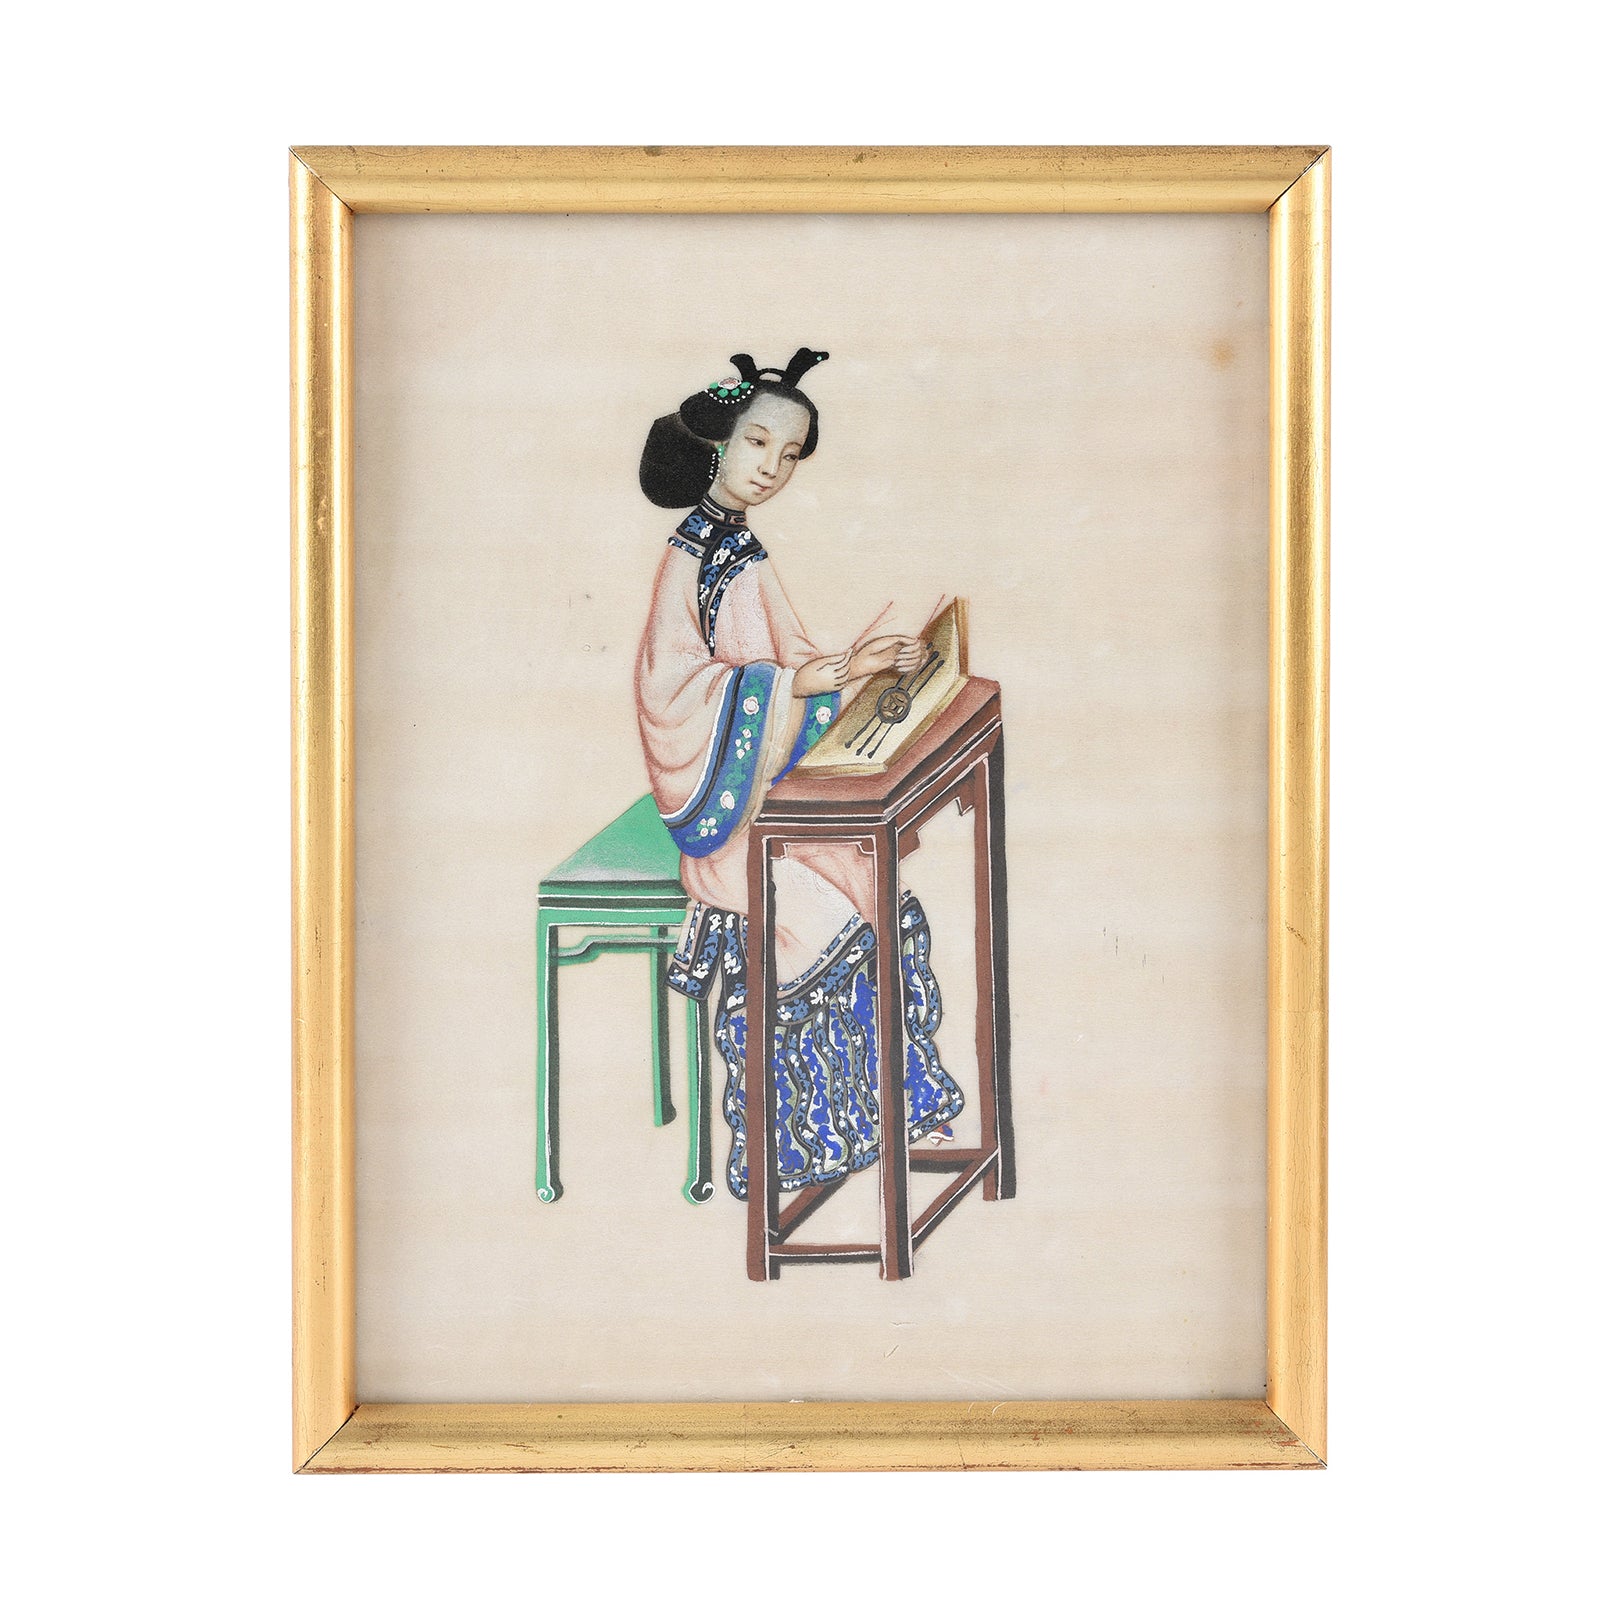 Framed Watercolour Painting of A Musician on Pith Paper - 19th Century I Indigo Antiques